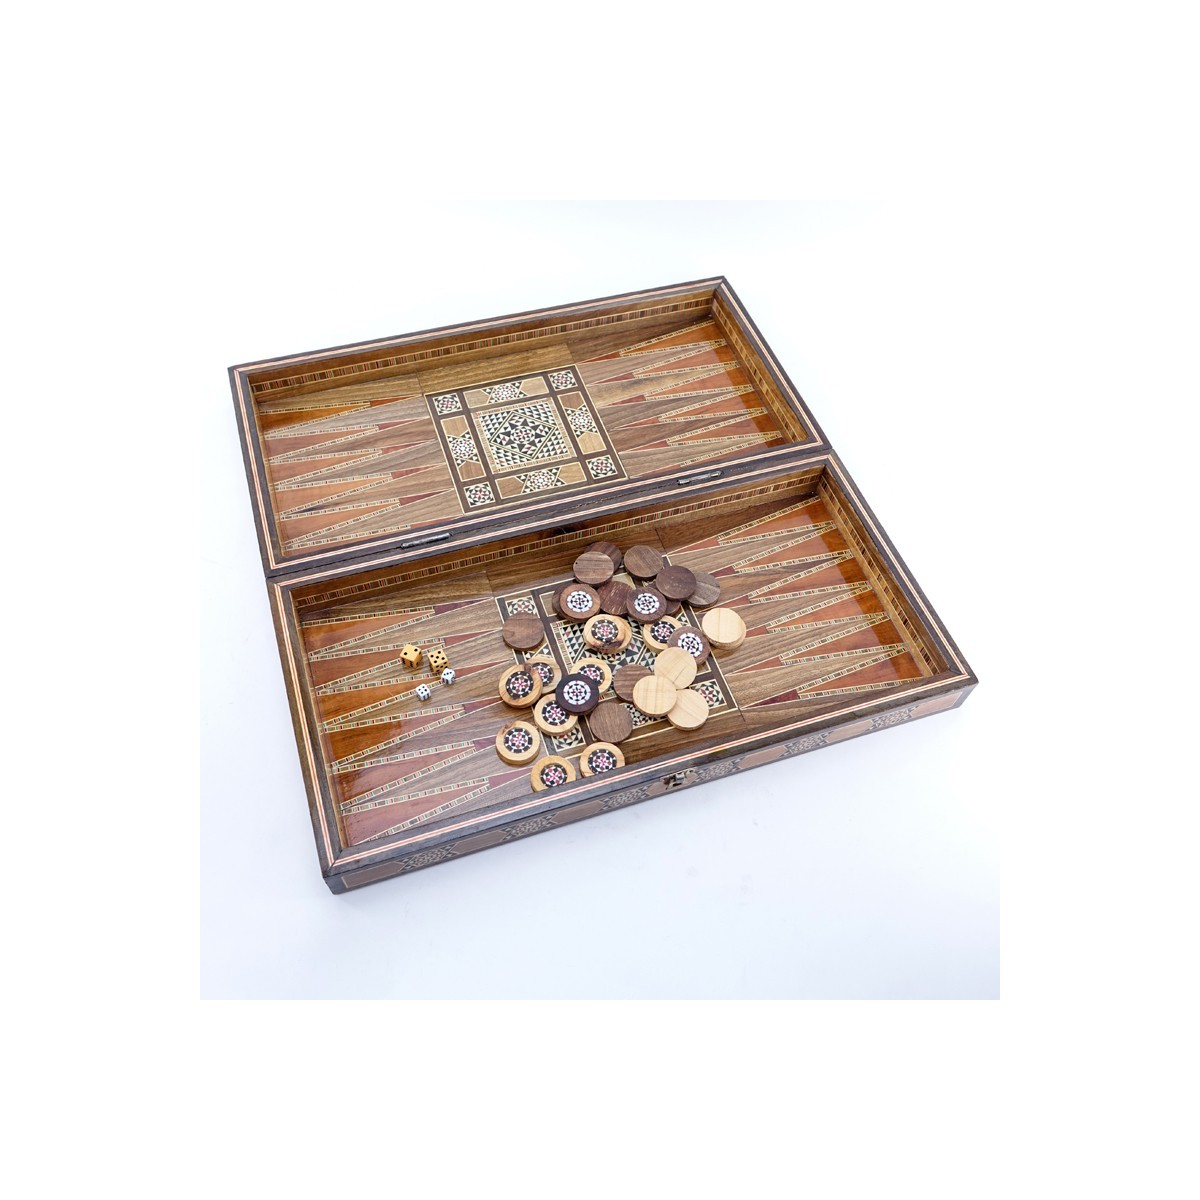 Early Persian Mosaic Wood and Mother of Pearl Inlaid Backgammon Case with Game Pieces. Typical rubbing to case, basic wear and possibly missing a few game pieces otherwise good condition.